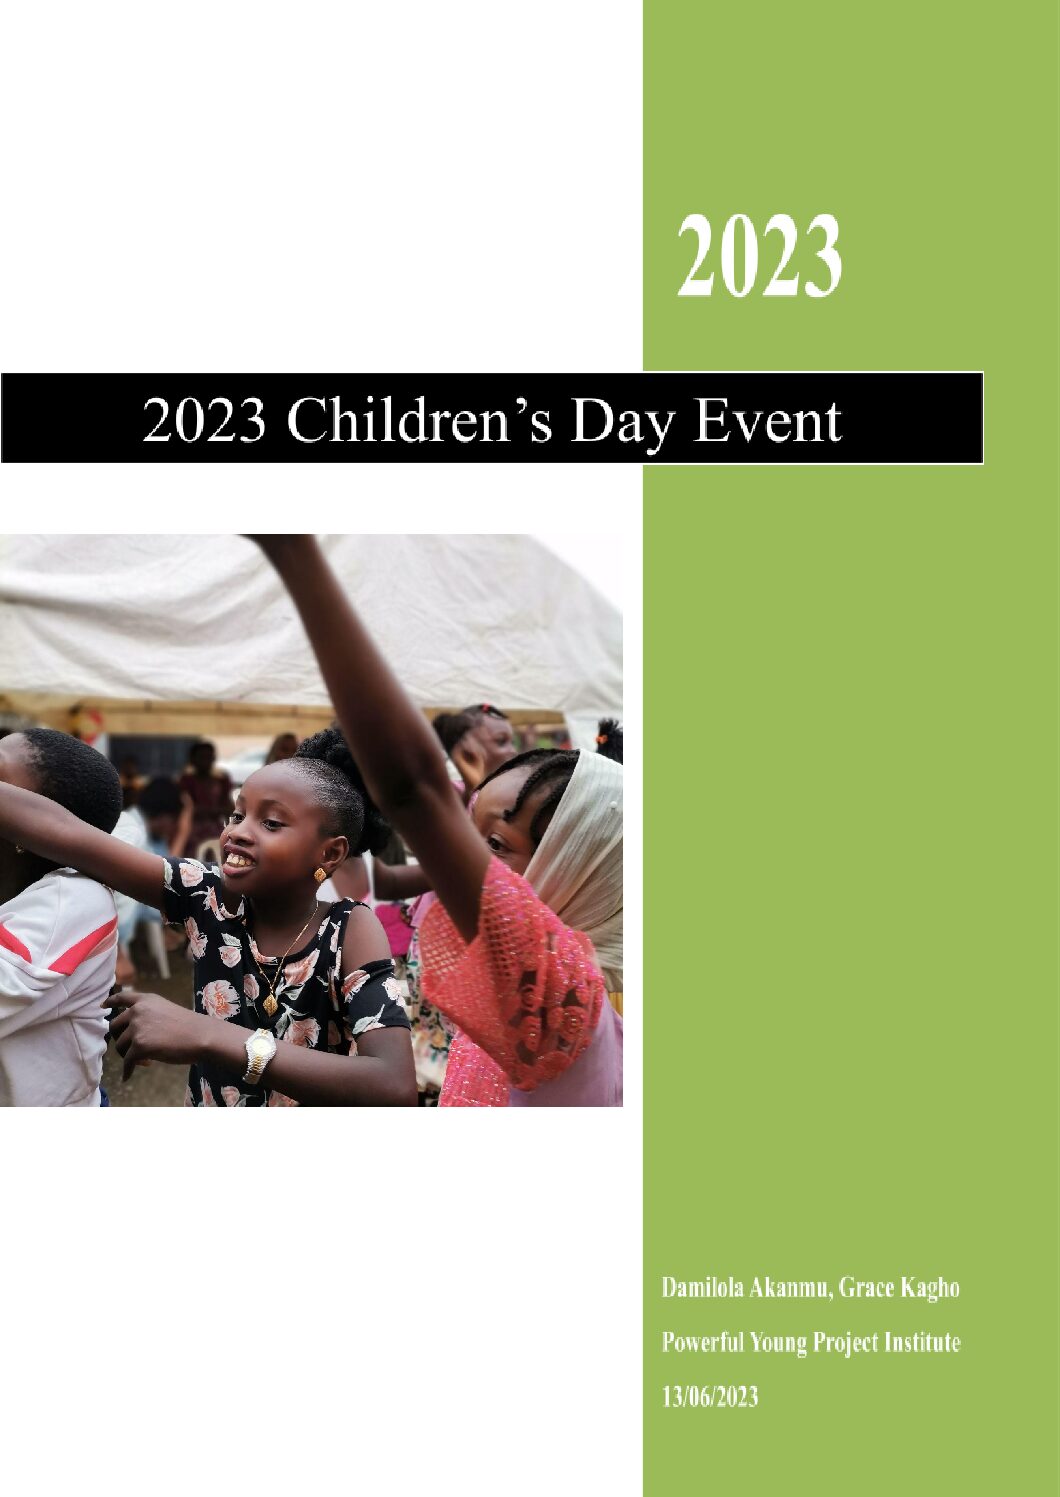 PYP 2023 Children’s Day Report.